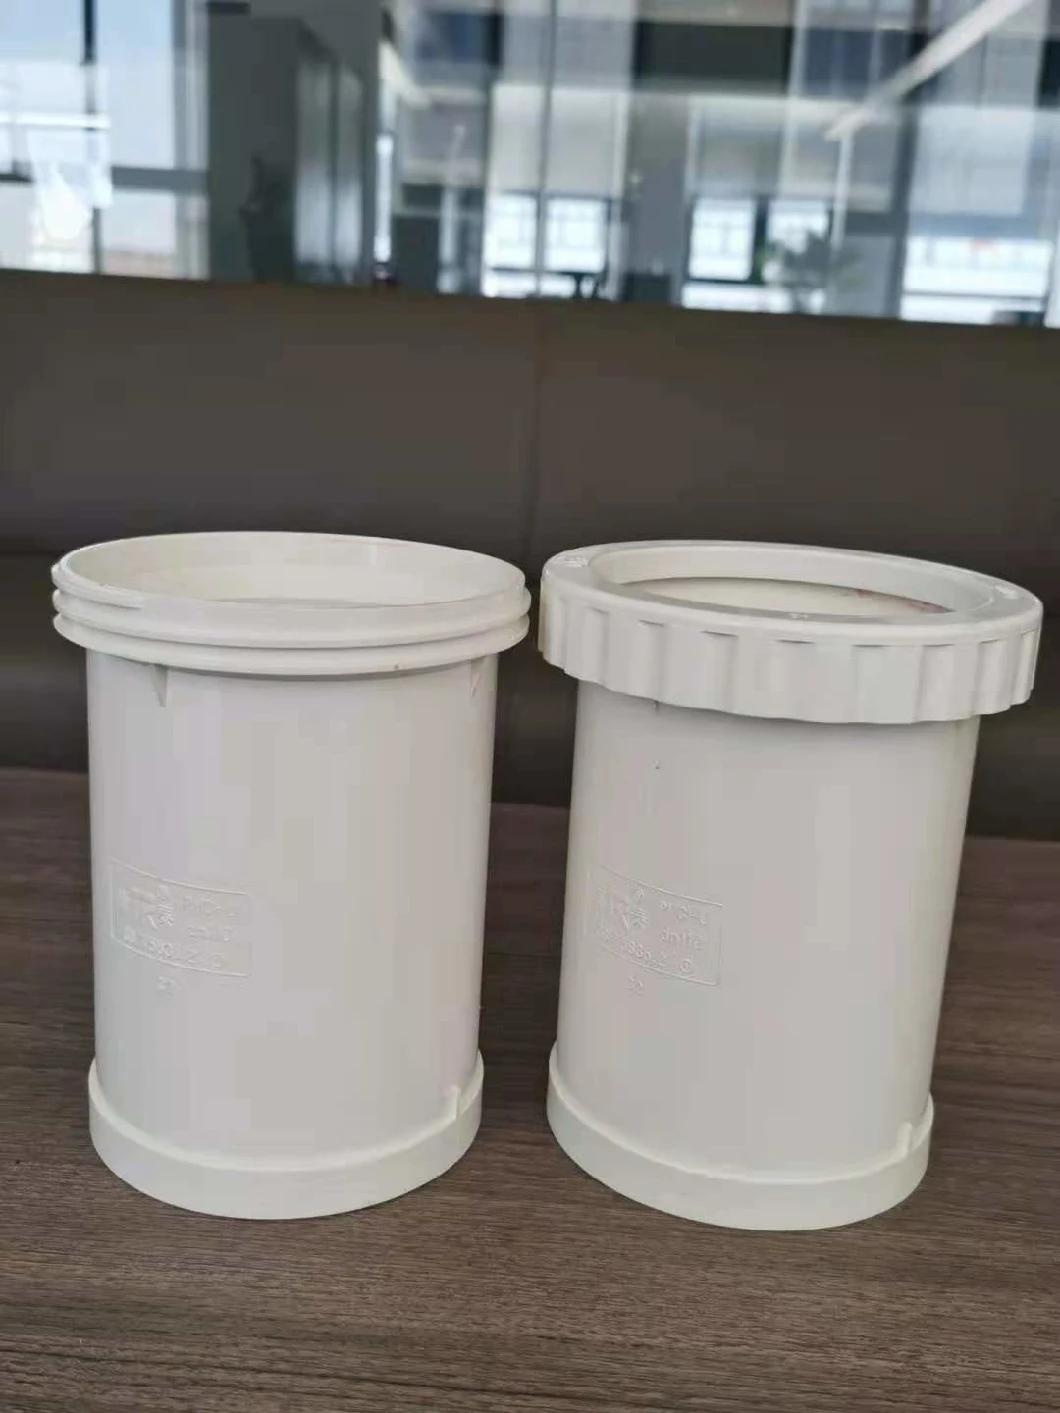 PVC Plastic Pipe Fittings, Plastic Mould, High Quality